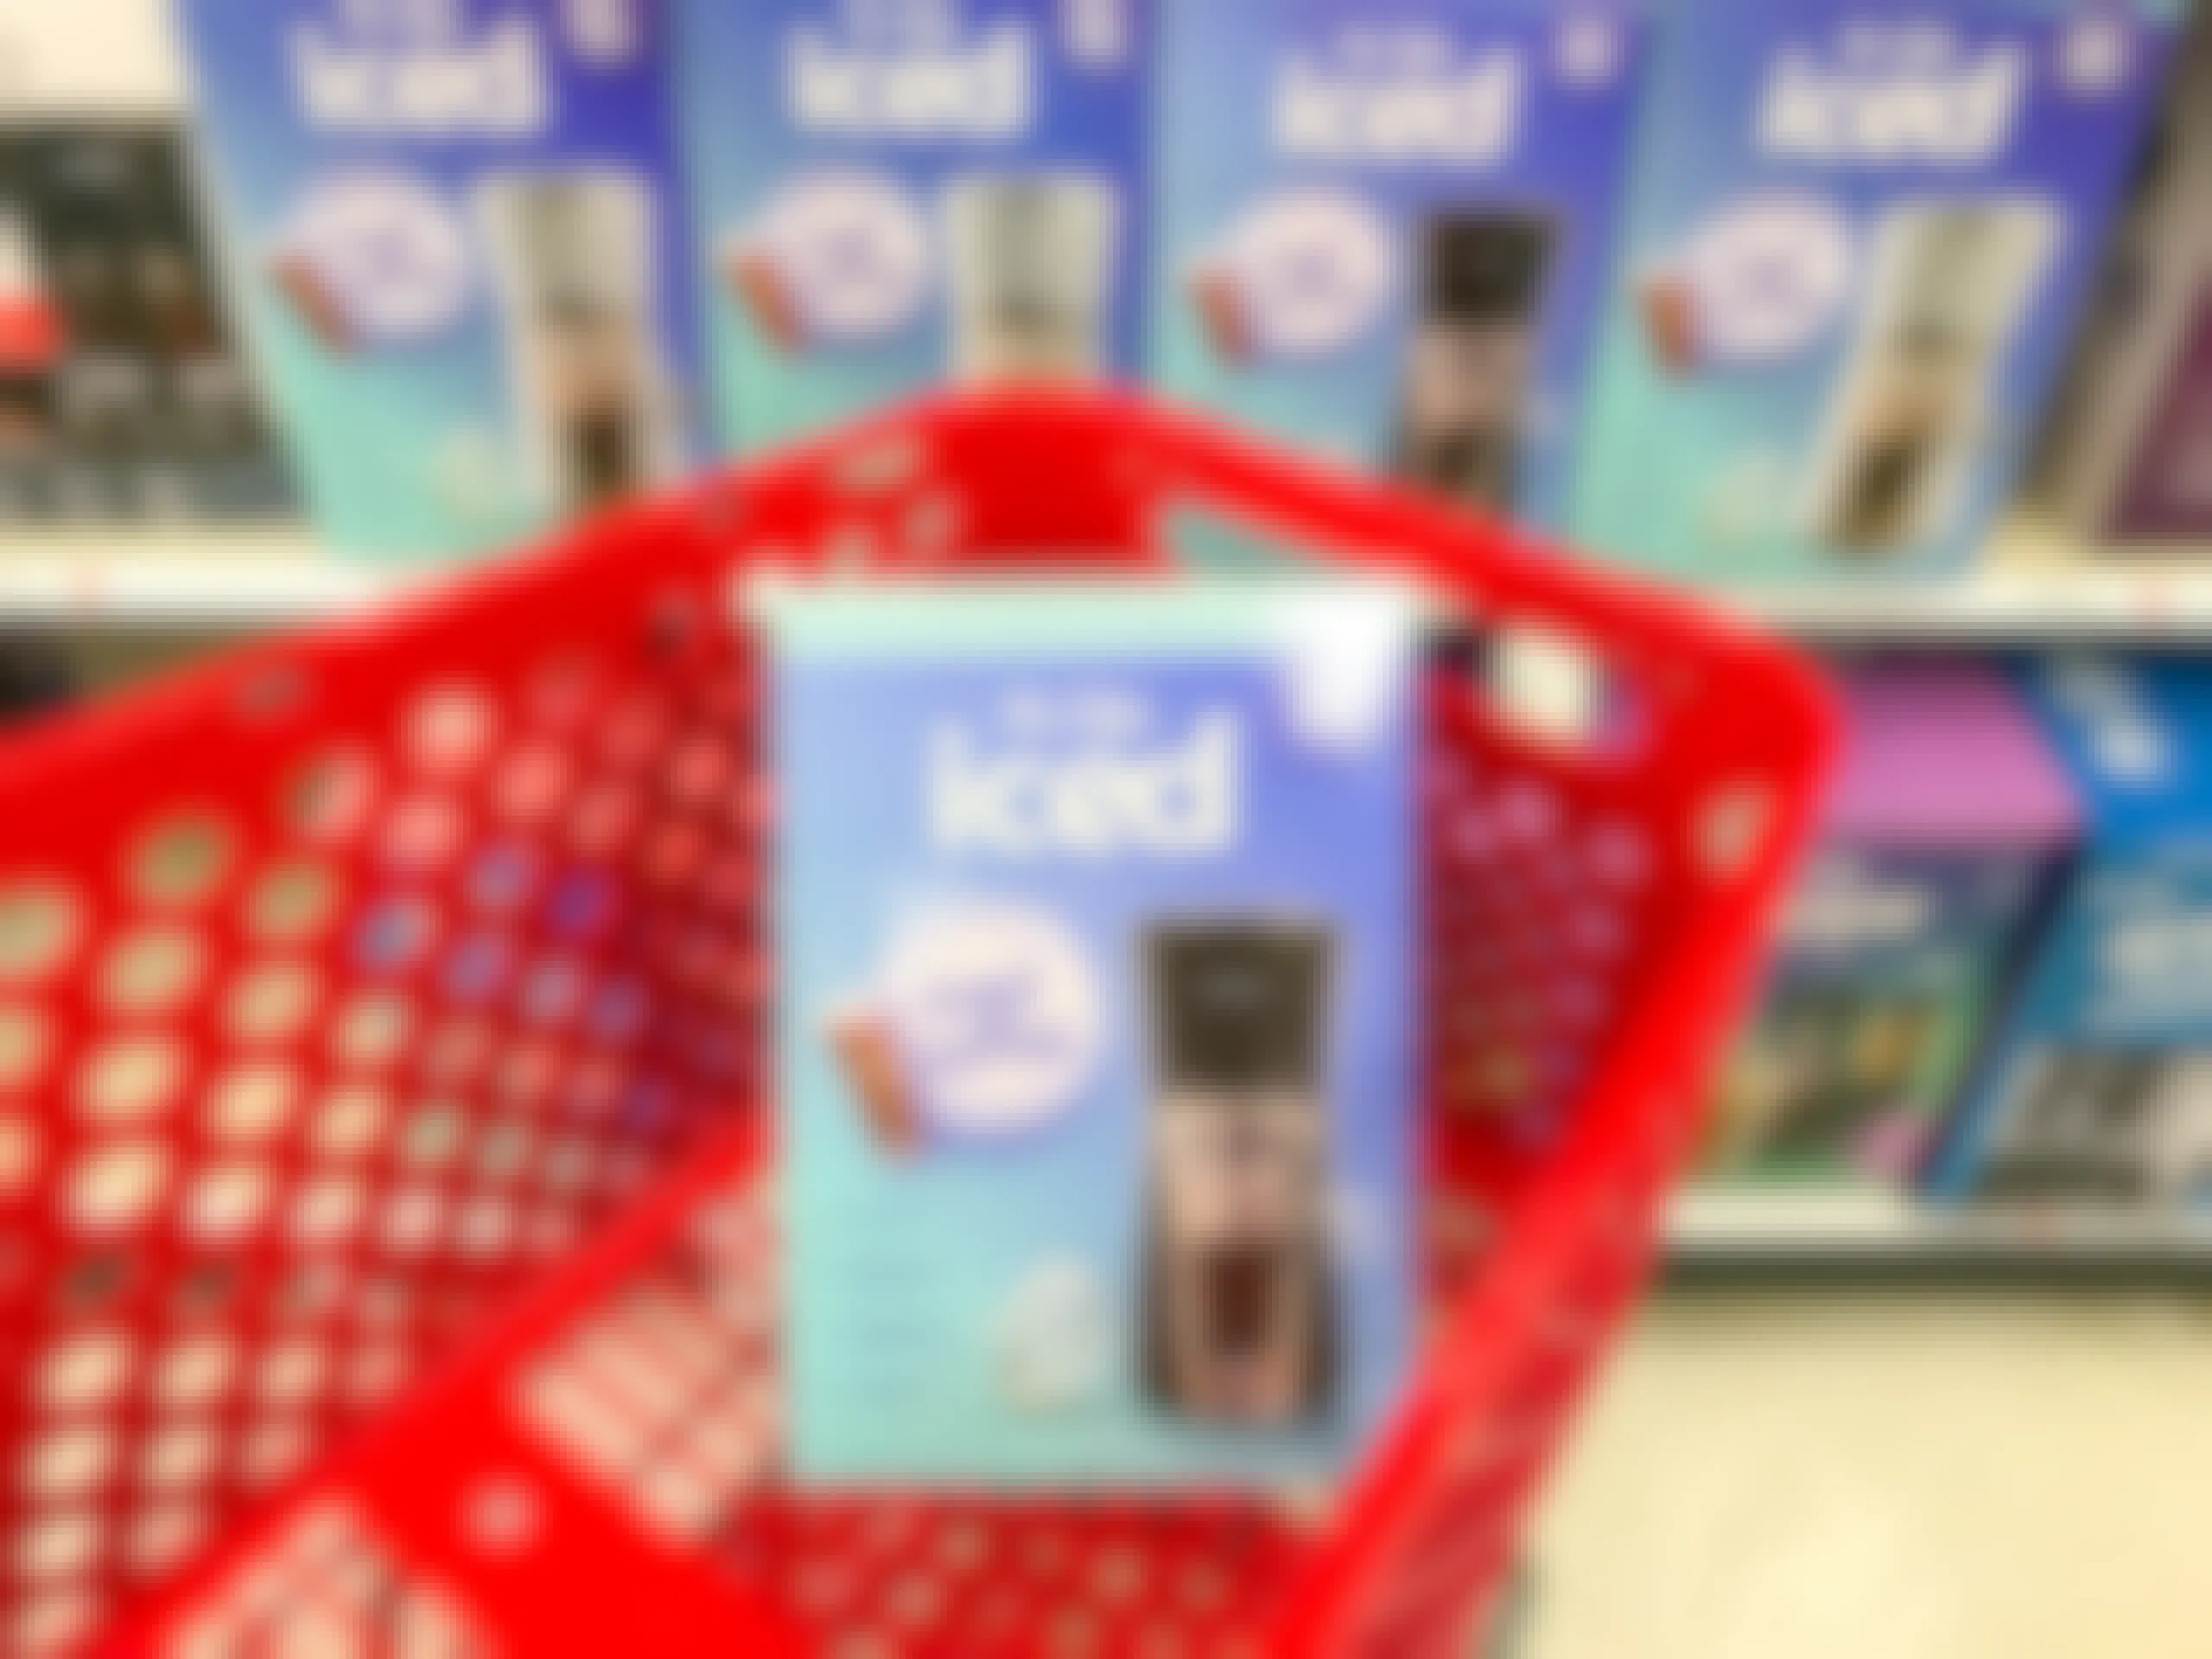 Mr. Coffee iced coffee maker in a Target cart